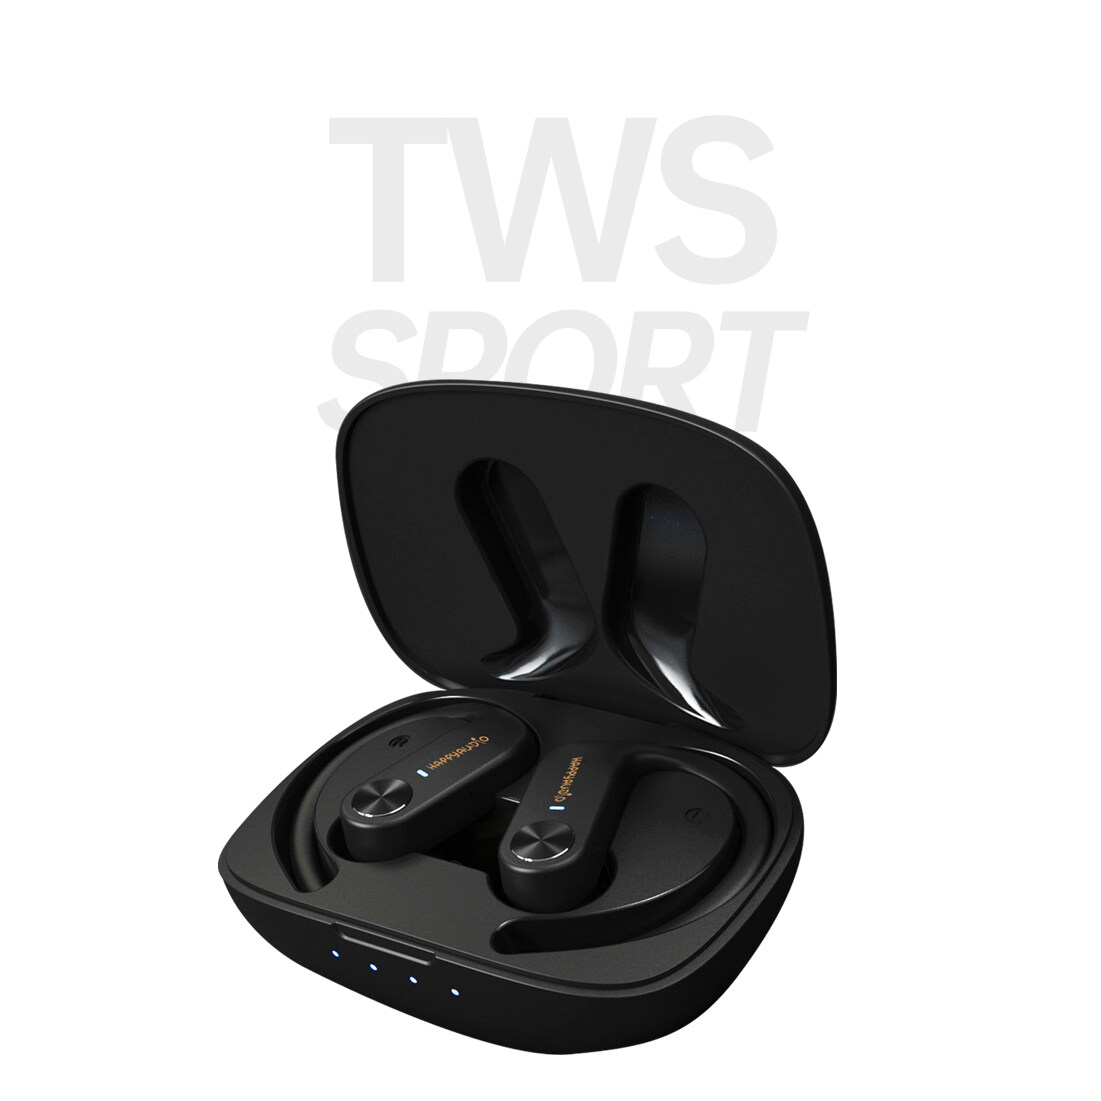 Happyaudio; tws factory; private label tws; chinese electronics; OEM Audio Products; Wireless Earbuds Manufacturer; Custom tws manufacturer China;tws technology; audio manufacturing